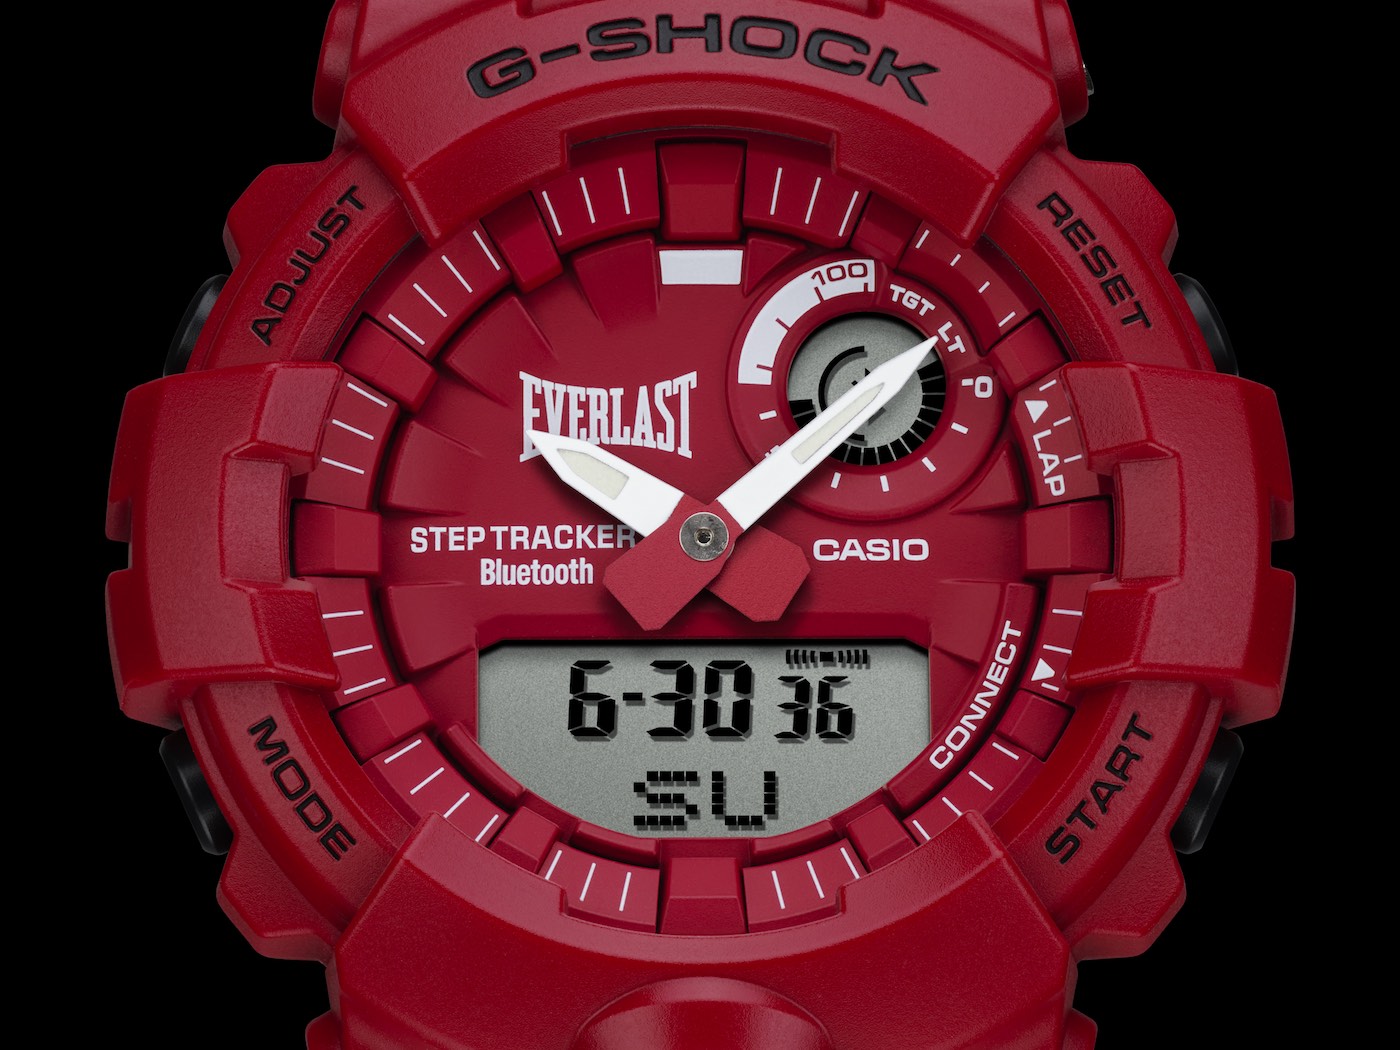 Casio G Shock Gba800el 4a Special Edition Watch Collaboration With Everlast Ablogtowatch